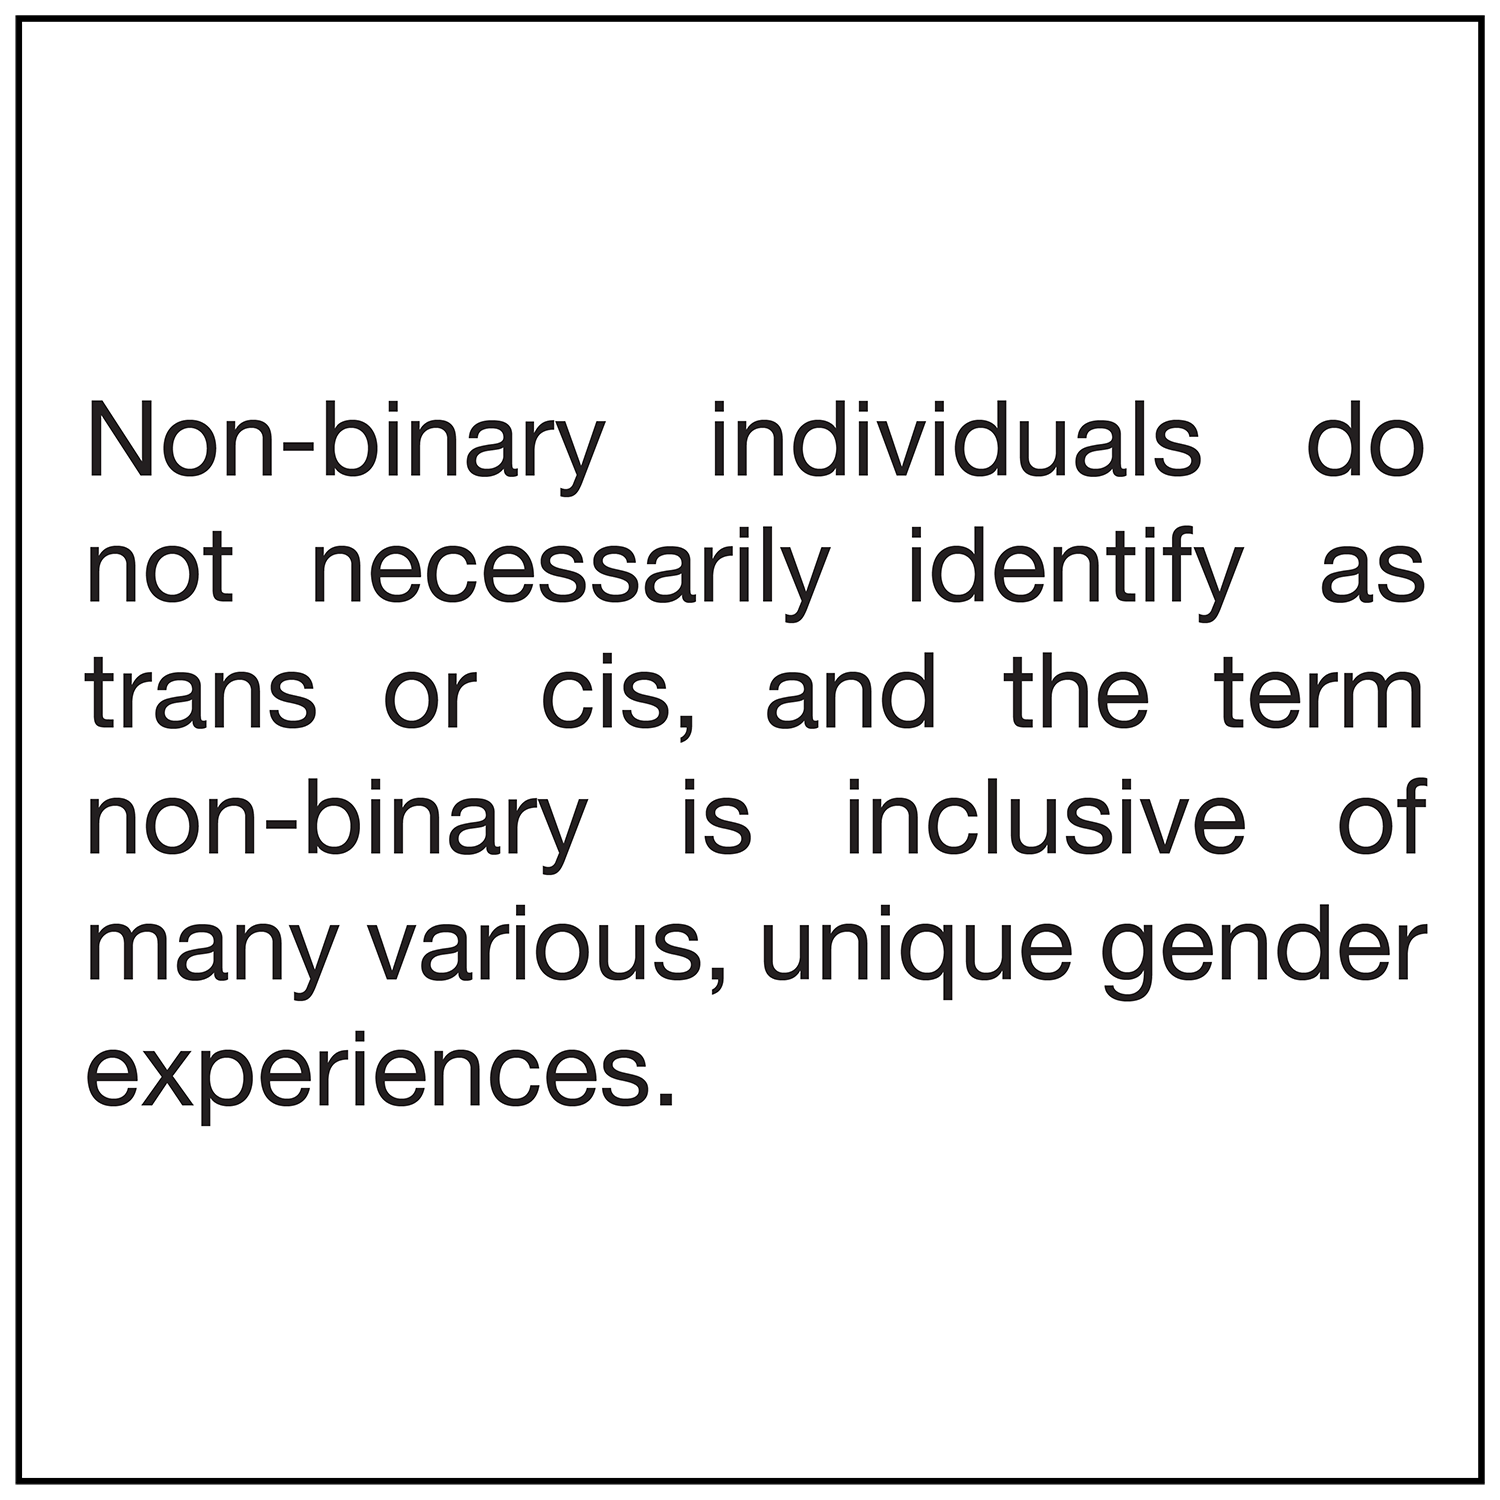  Non-binary individuals do not necessarily identify as trans or cis, and the term non-binary is inclusive of many various, unique gender experiences. 